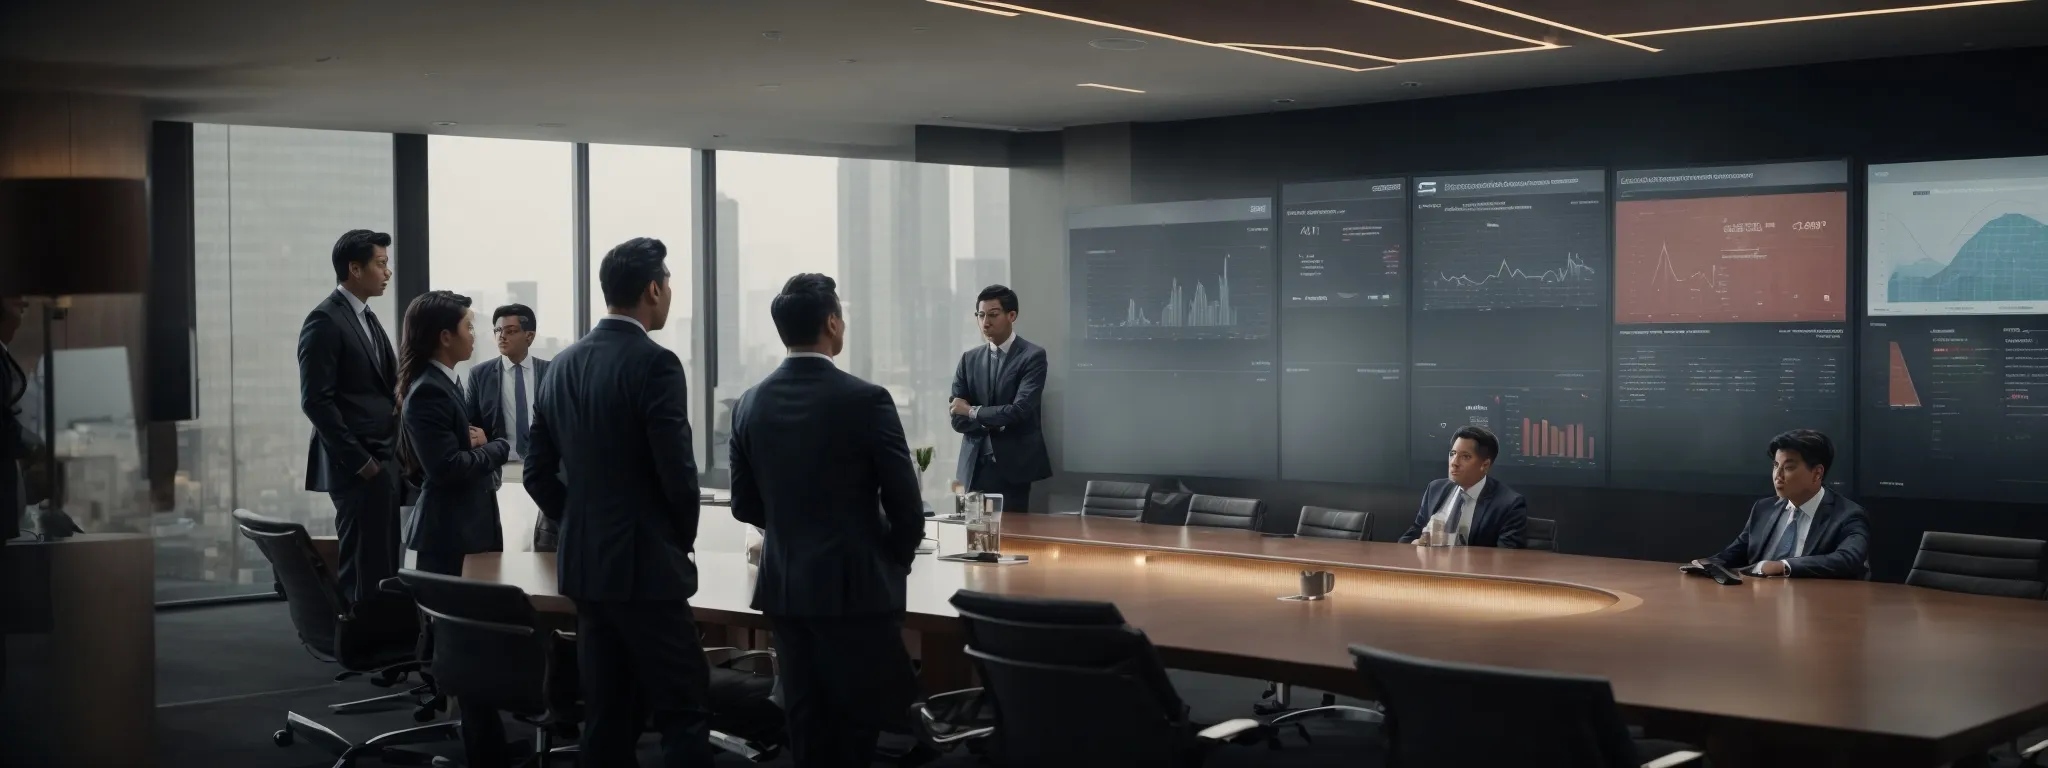 a boardroom with executives discussing a rebranding strategy next to a large digital screen displaying a website analytics dashboard.